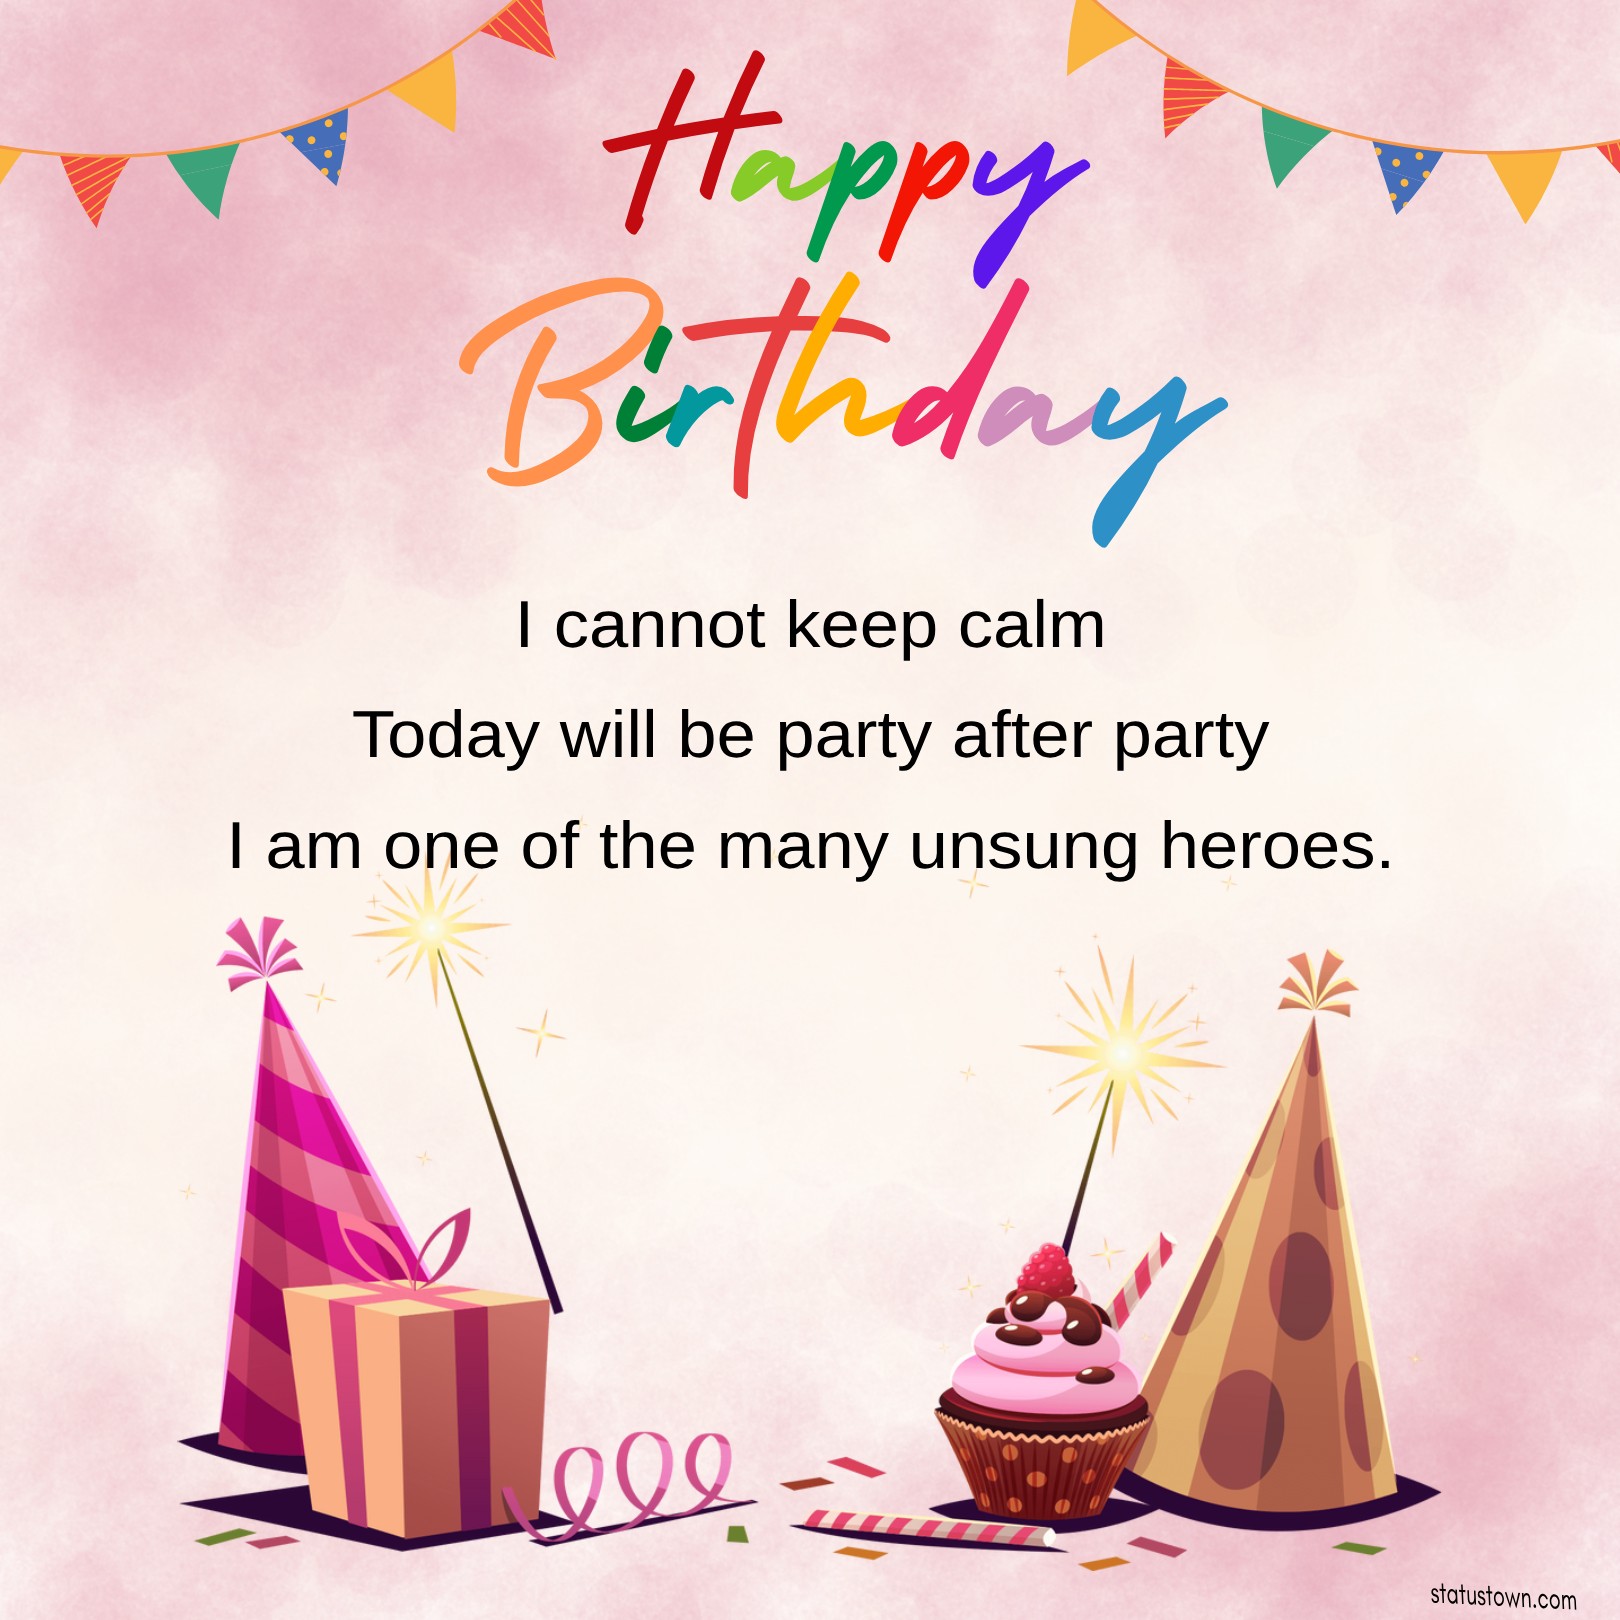 I cannot keep calm. Today will be party after party. I am one of the many unsung heroes. -  Birthday Wishes for Myself